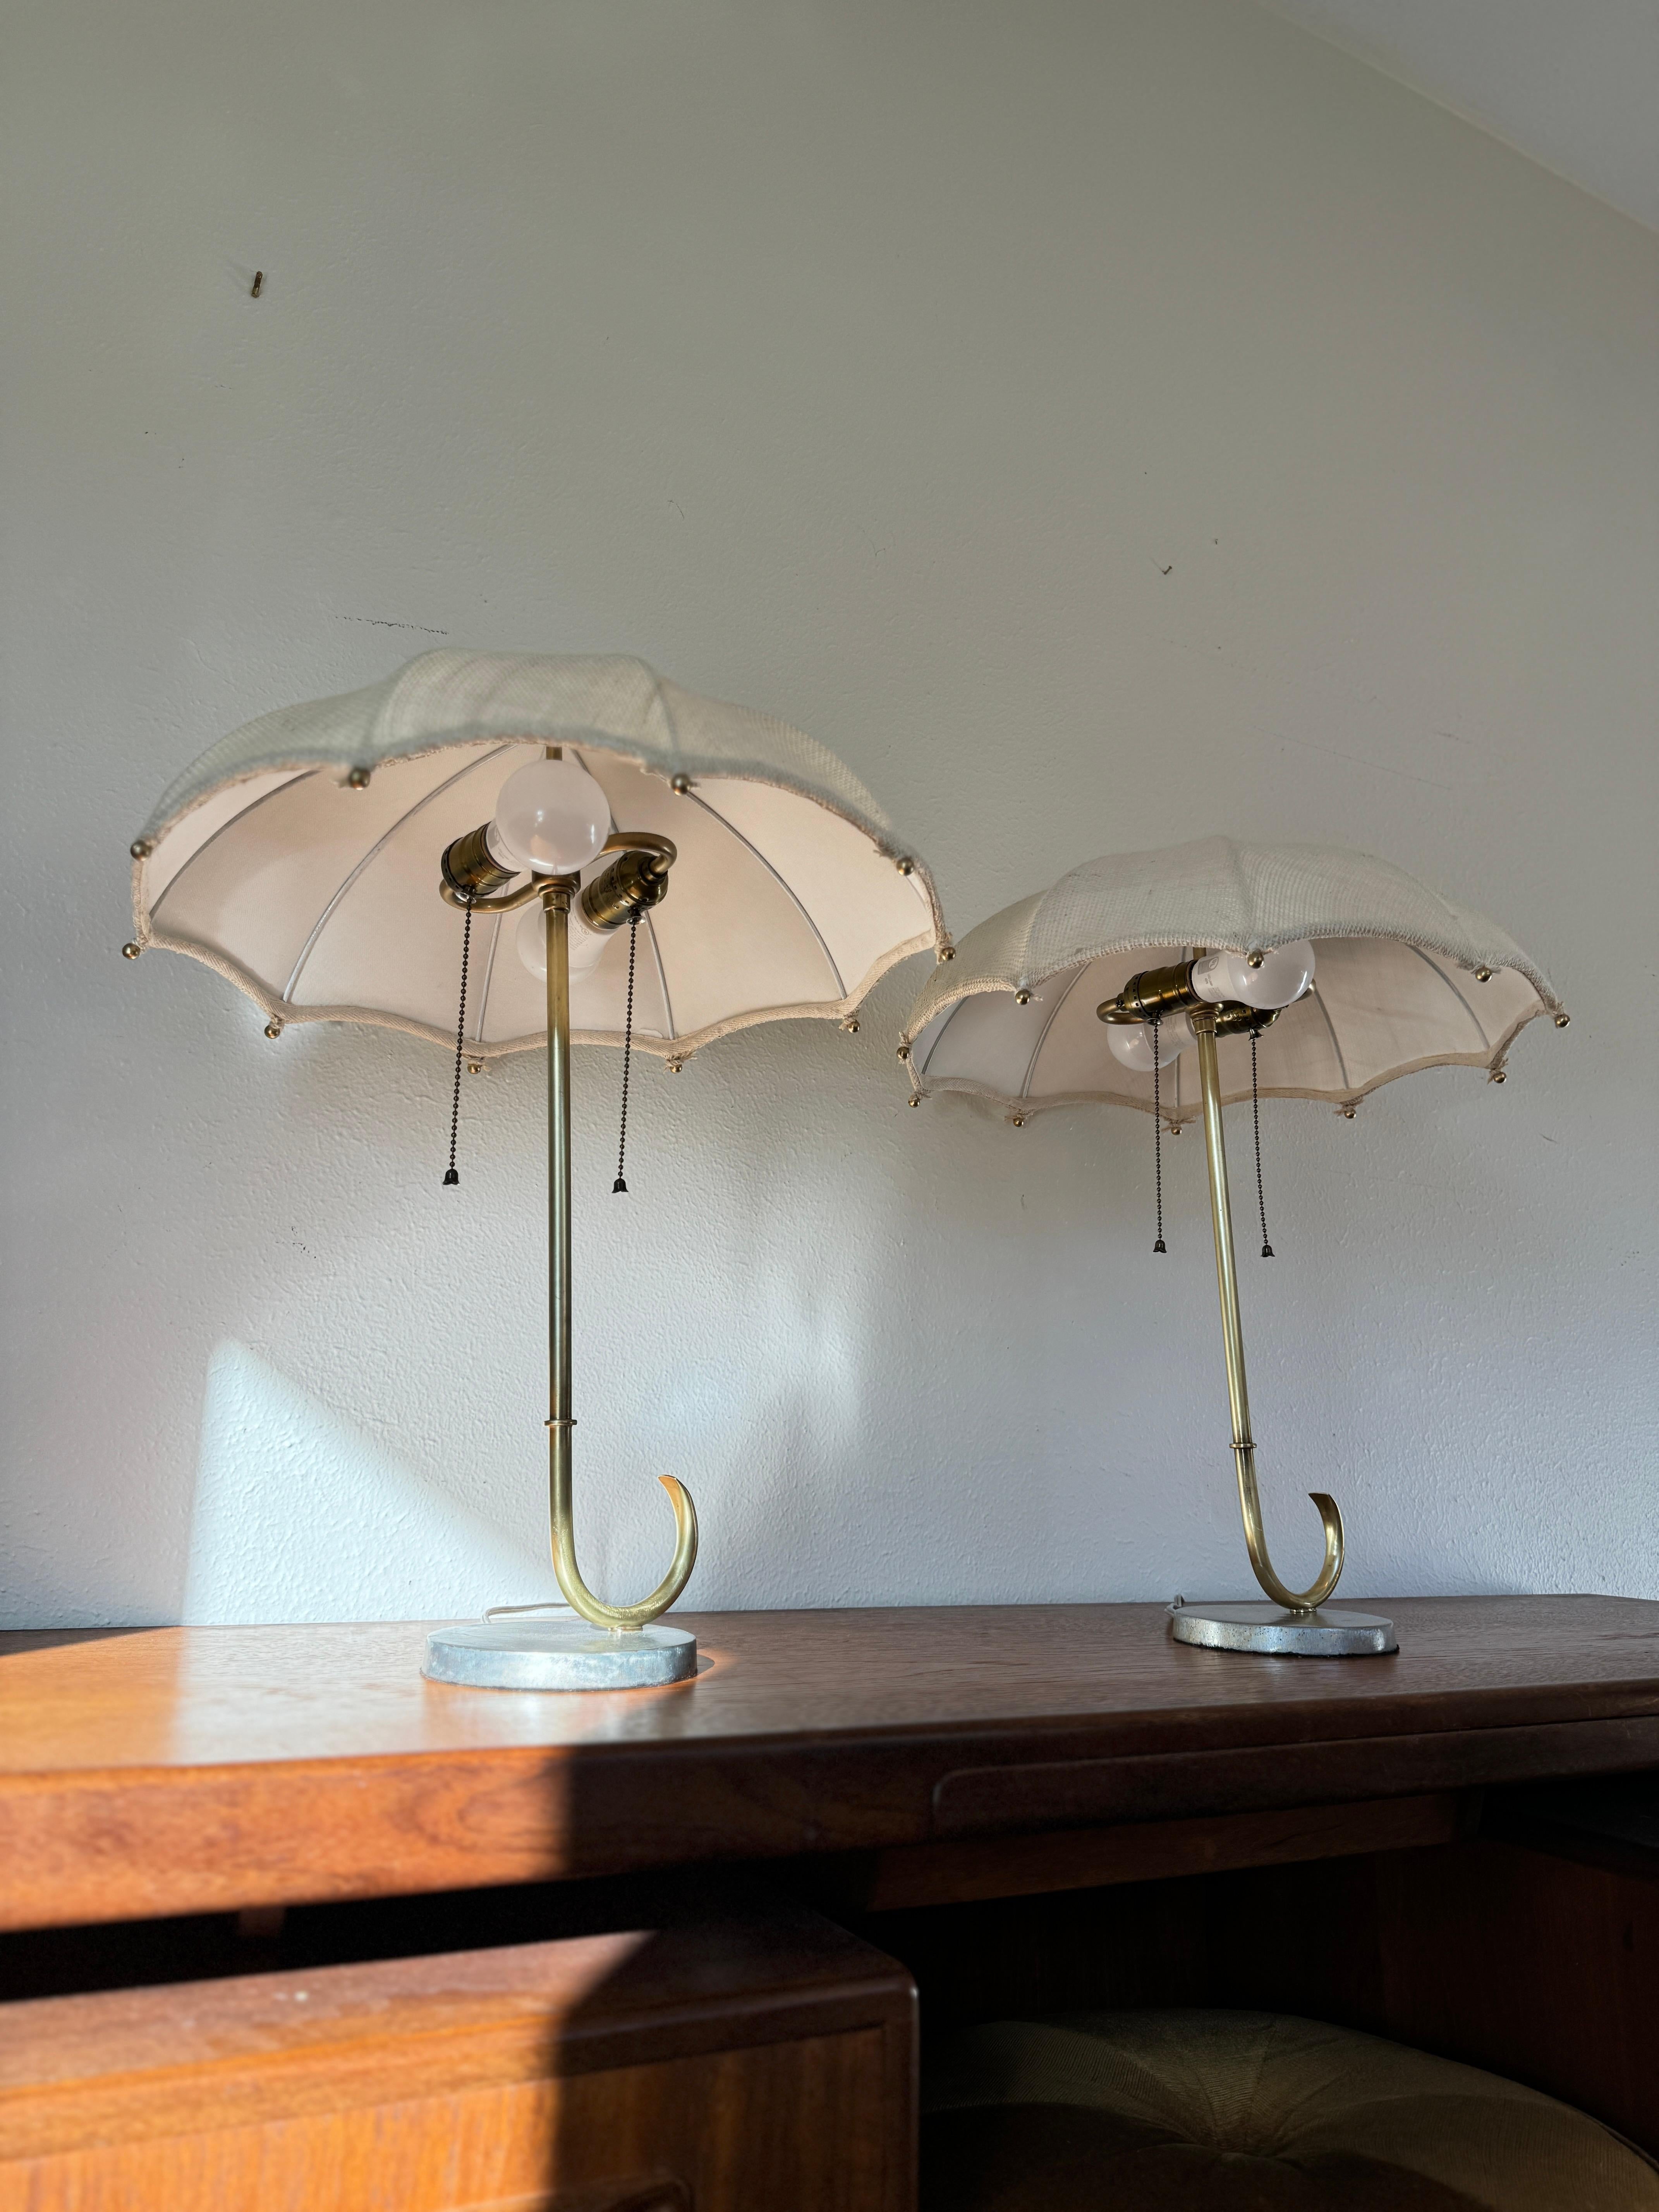 Pair of umbrella table lamps by Gilbert Rohde for Mutual Sunset lamp co 1930s For Sale 2